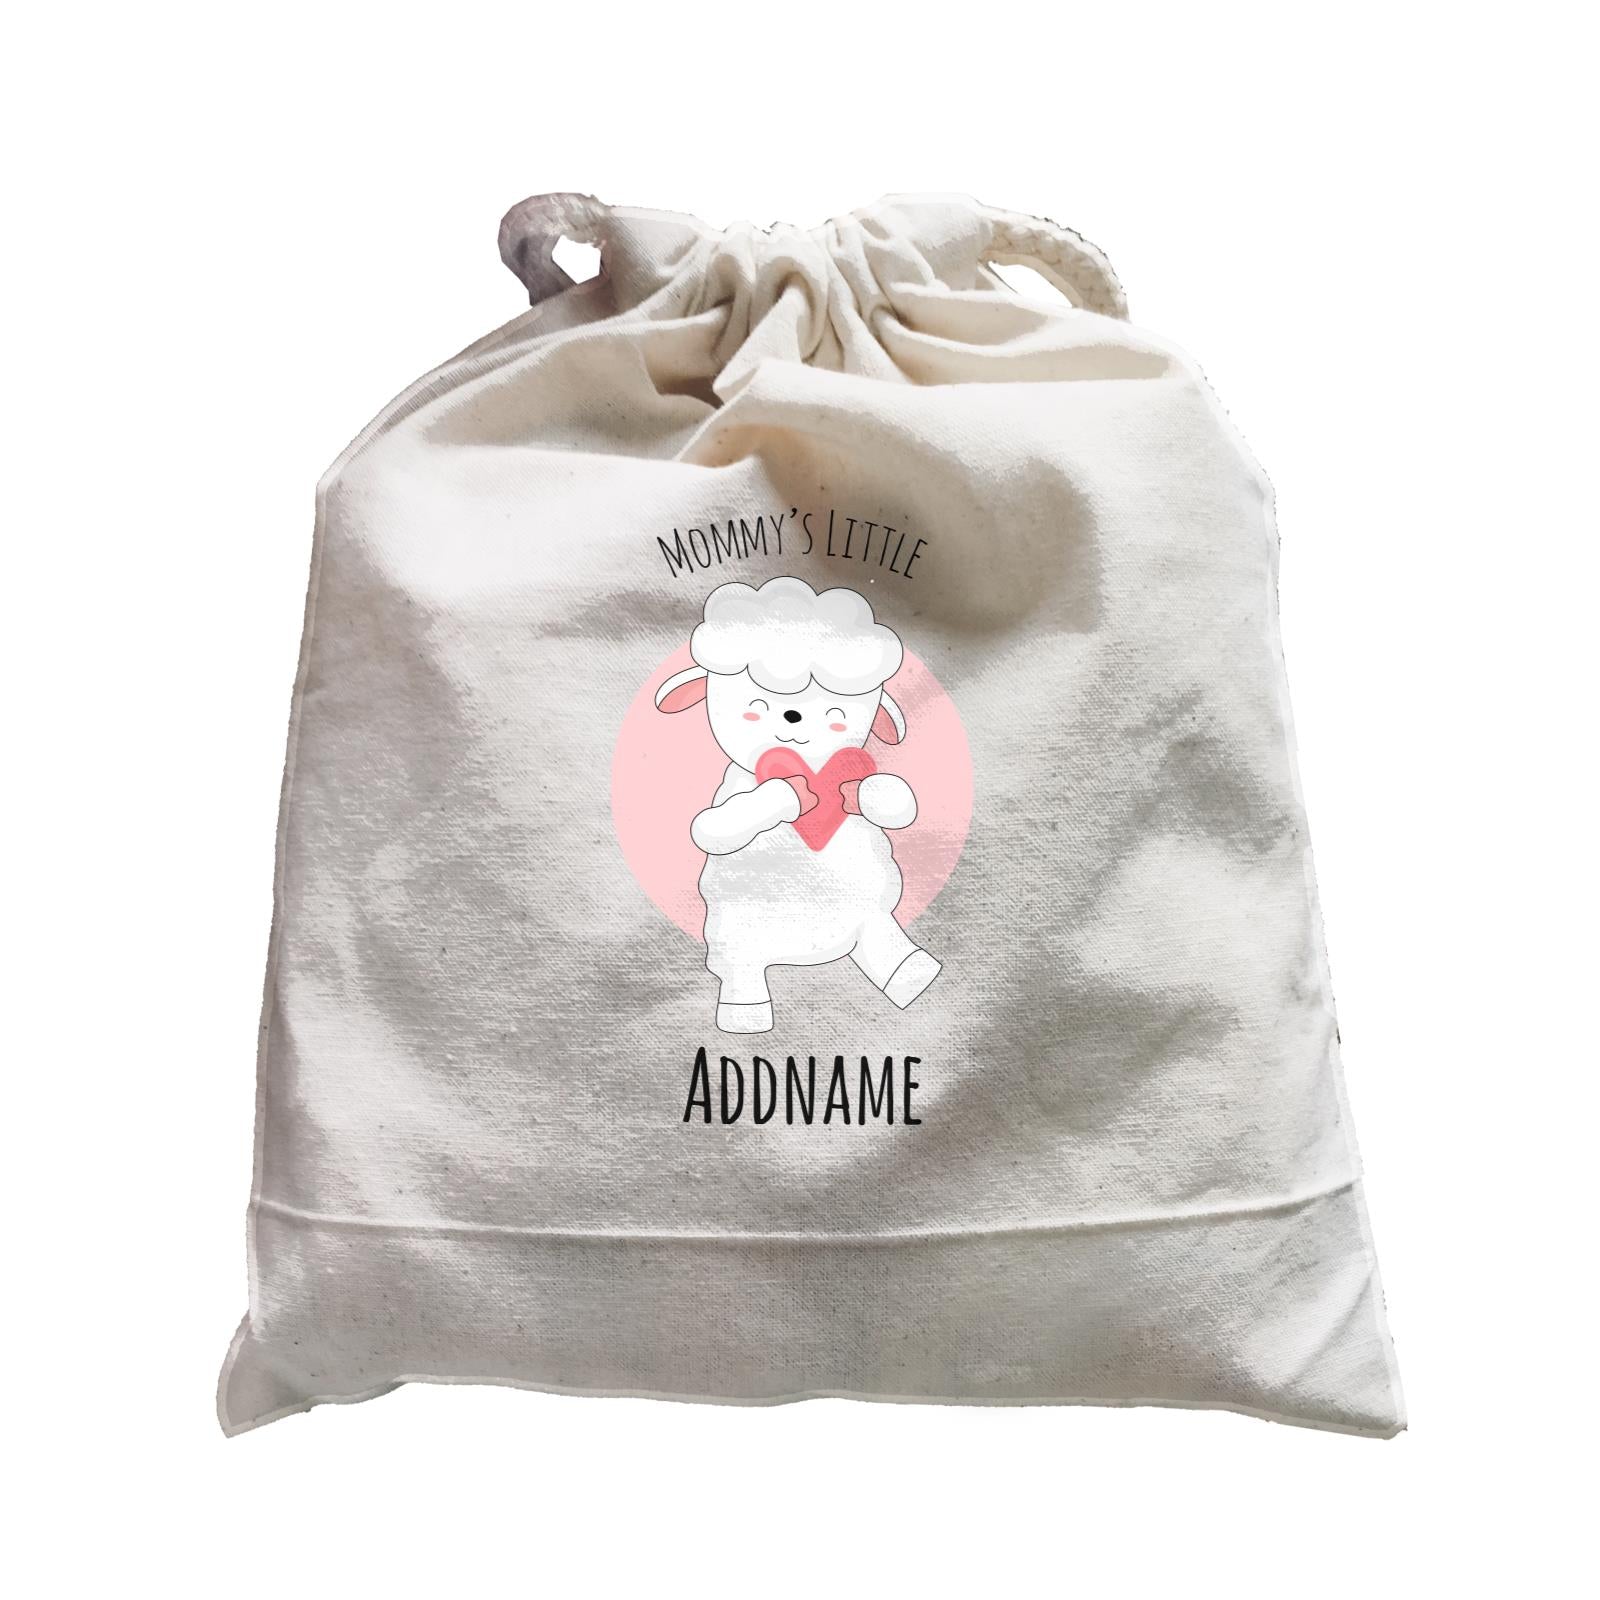 Sweet Animals Sketches Sheep Mommy's Little Addname Satchel